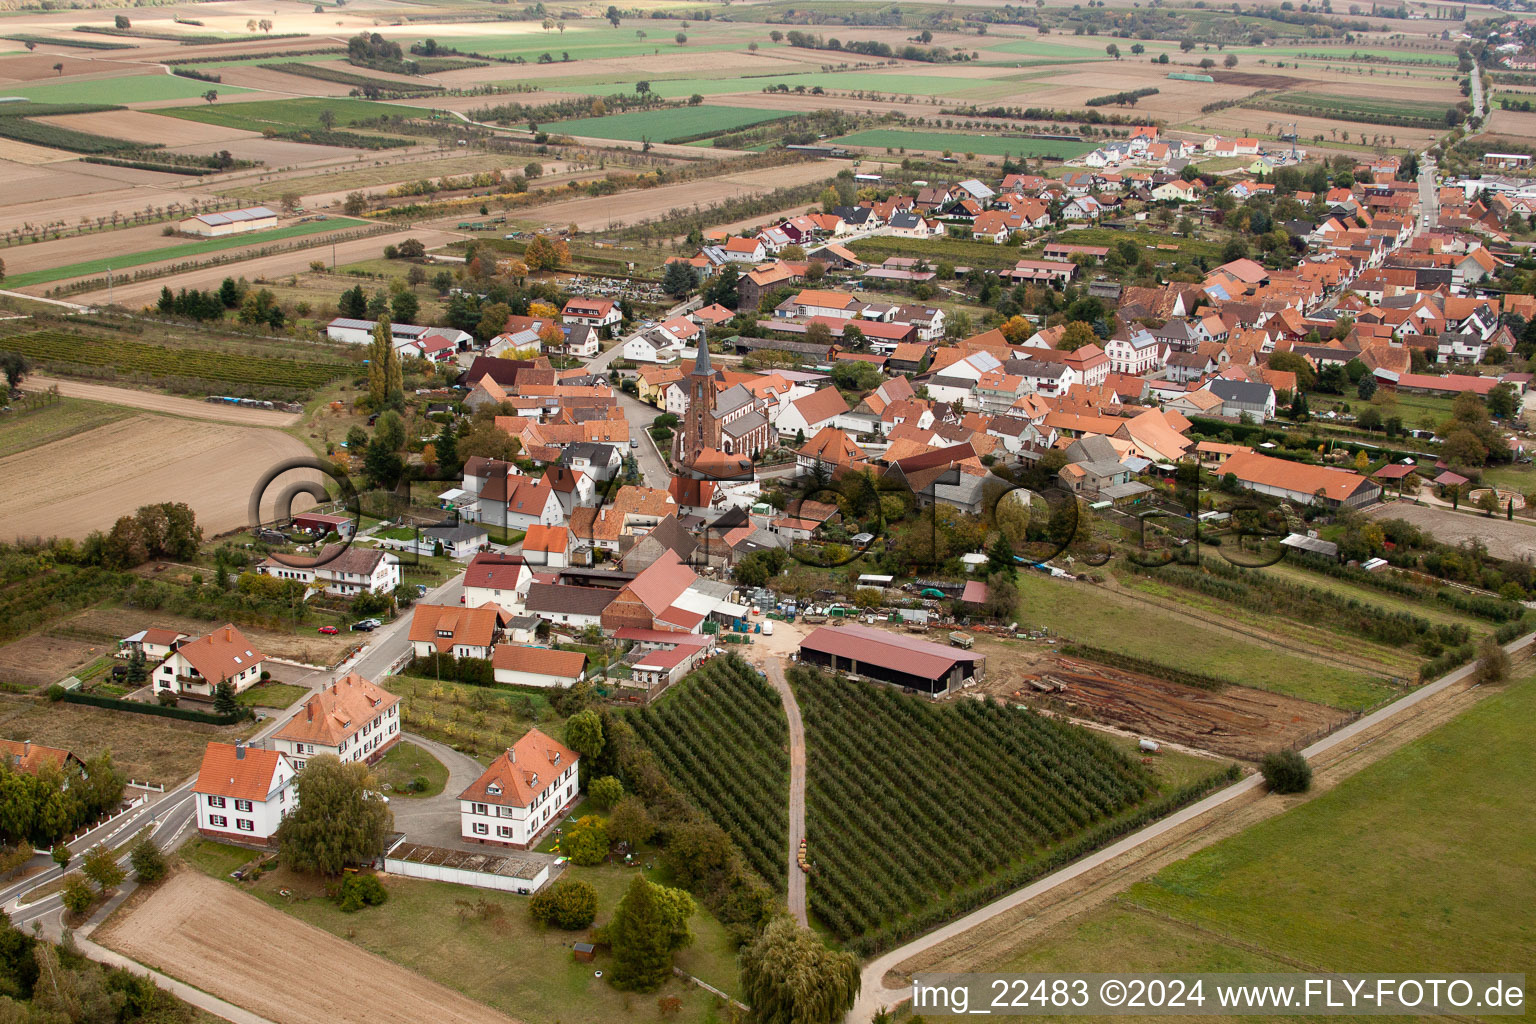 Aerial photograpy of Village - view on the edge of agricultural fields and farmland in Schweighofen in the state Rhineland-Palatinate, Germany